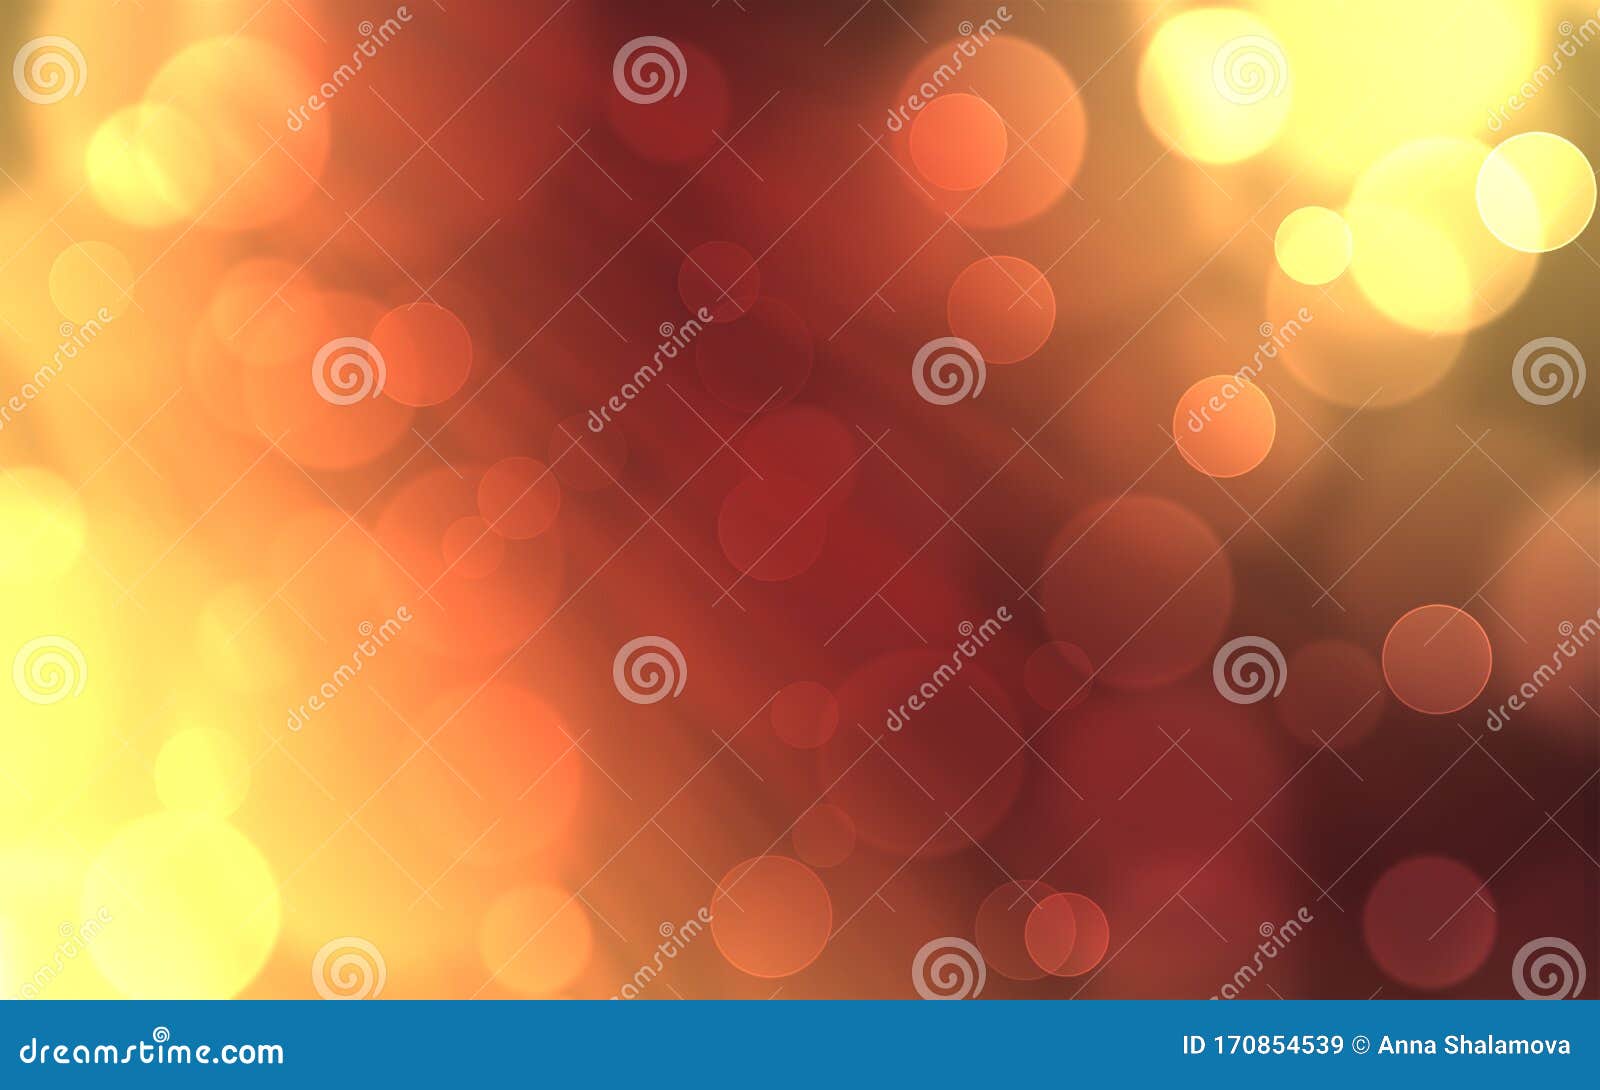 Abstractred and Gold Bokeh Banner Background with Sparkles - Happy ...